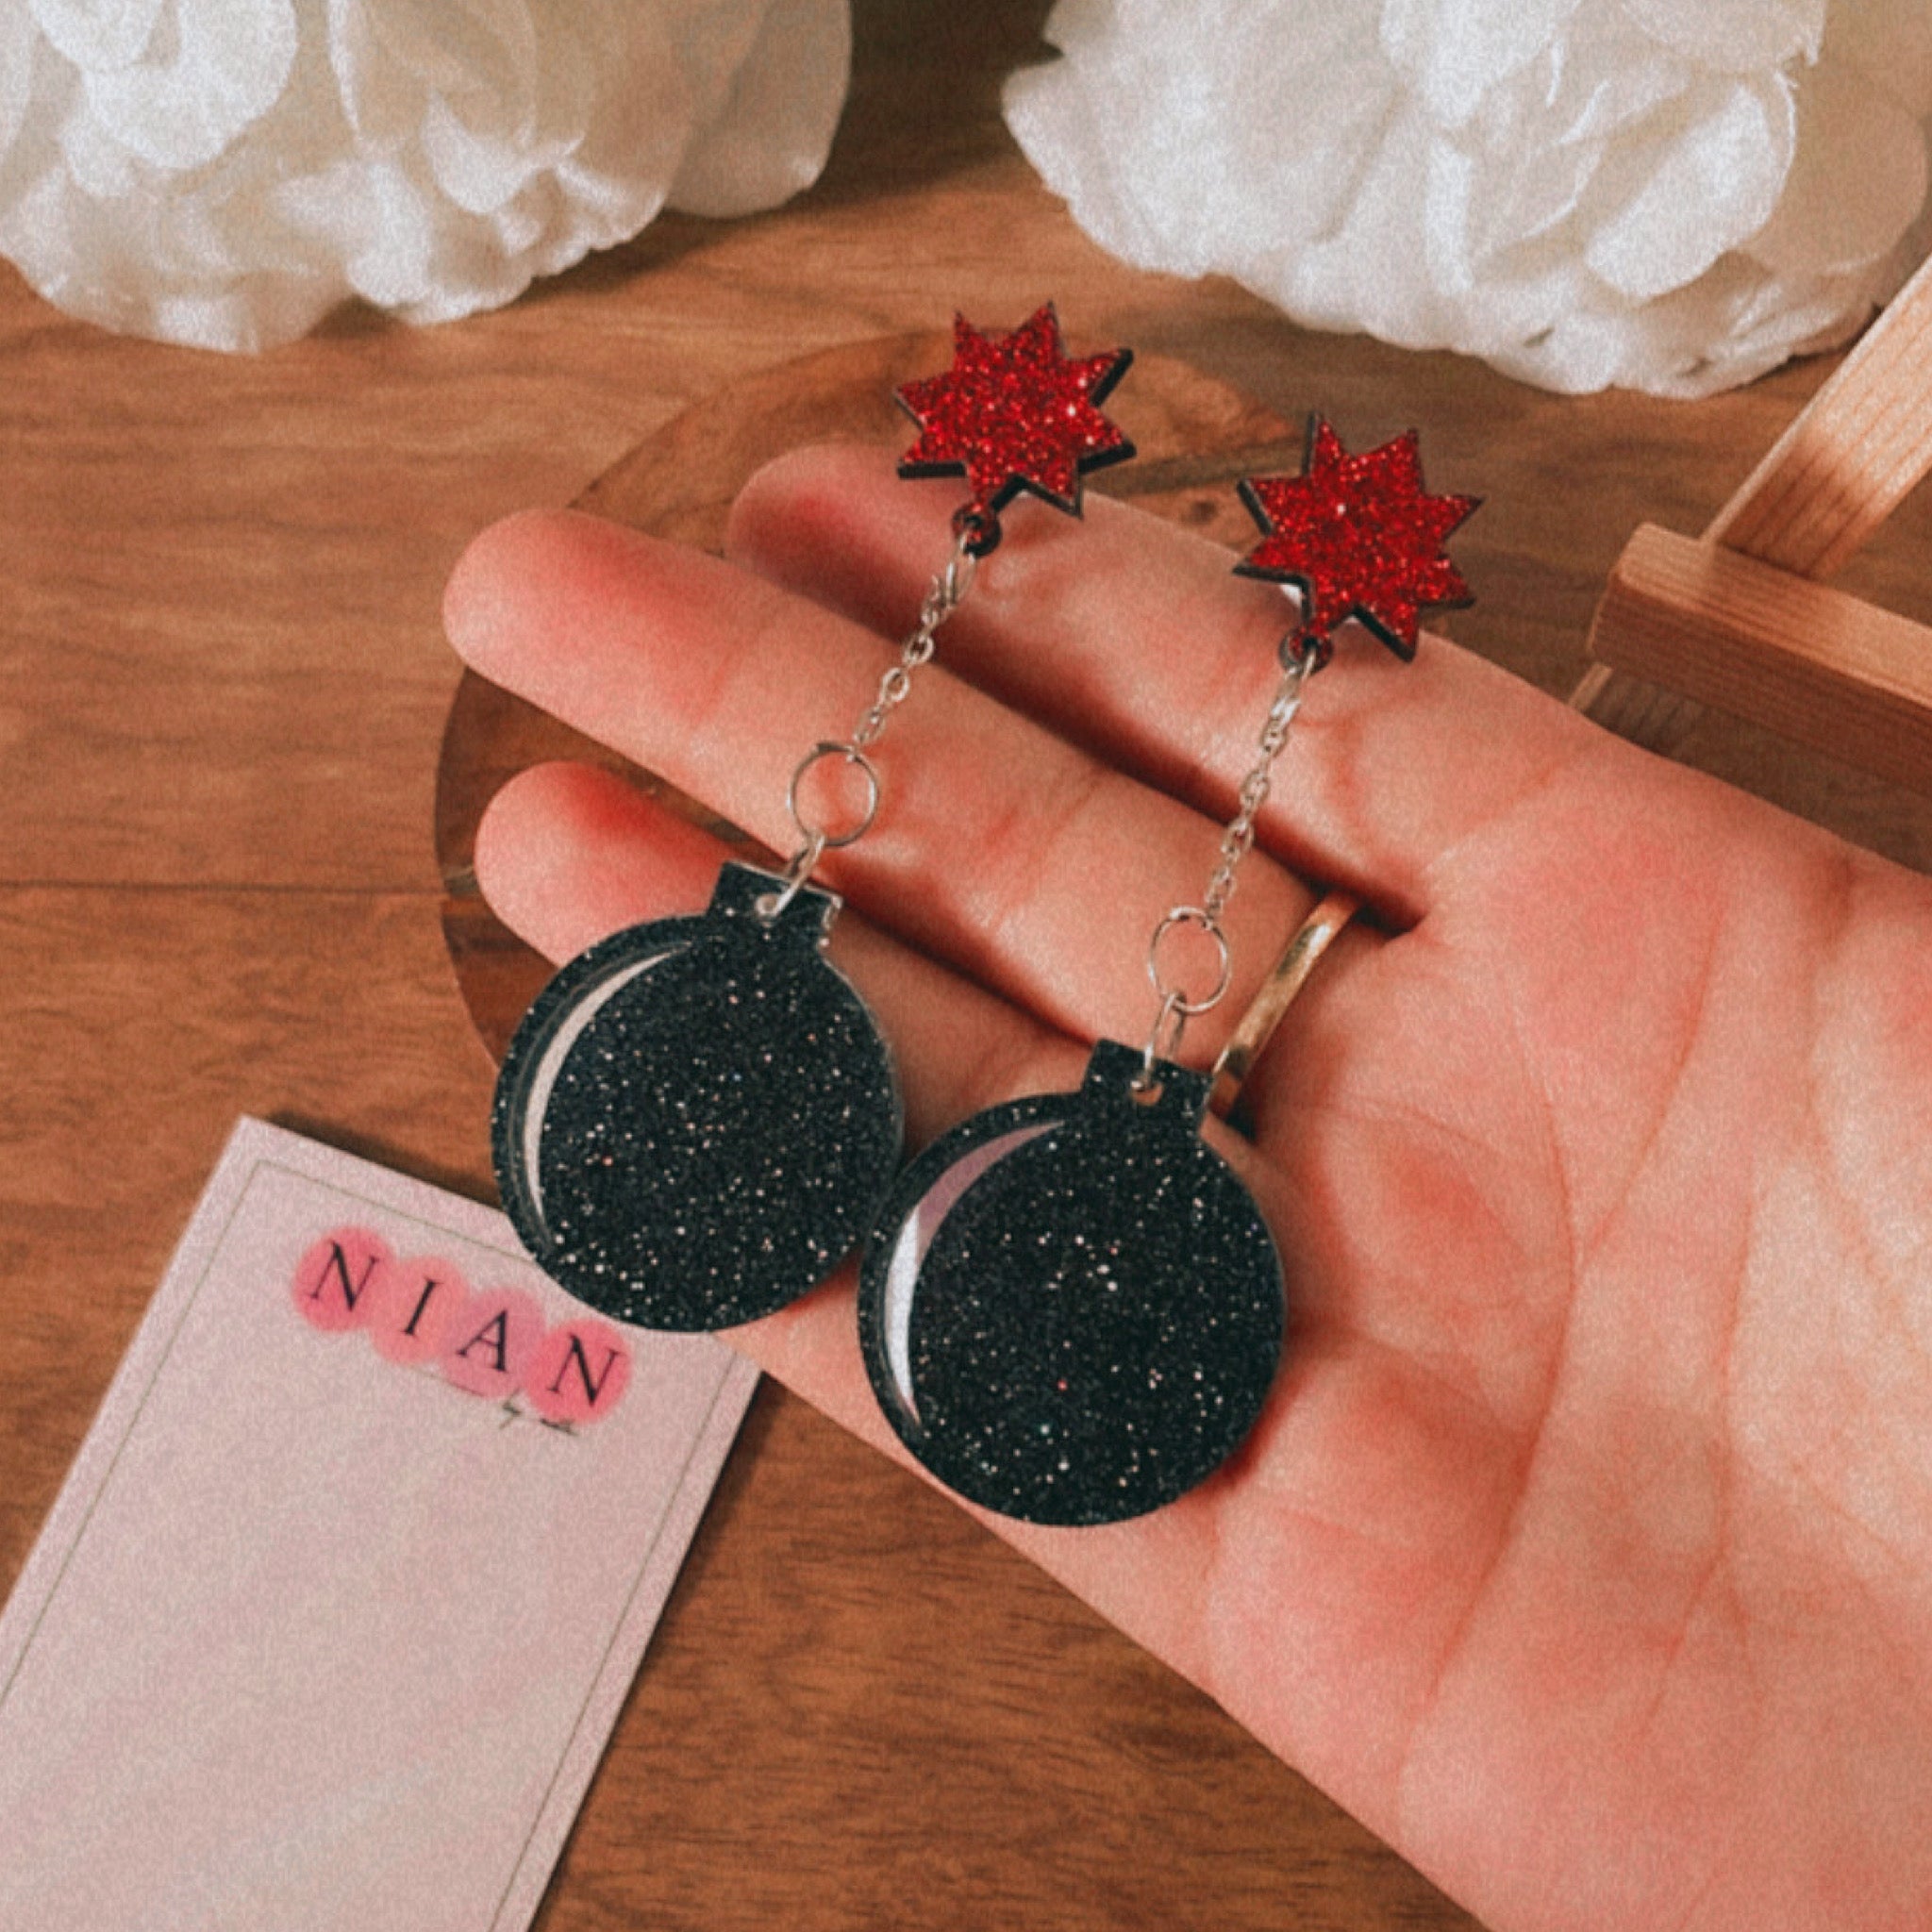 Pataka Earrings - Shimmer black and red - Nian by Nidhi - in a white and brown background, placed on a hand, with a Nian by Nidhi Earring card in the background